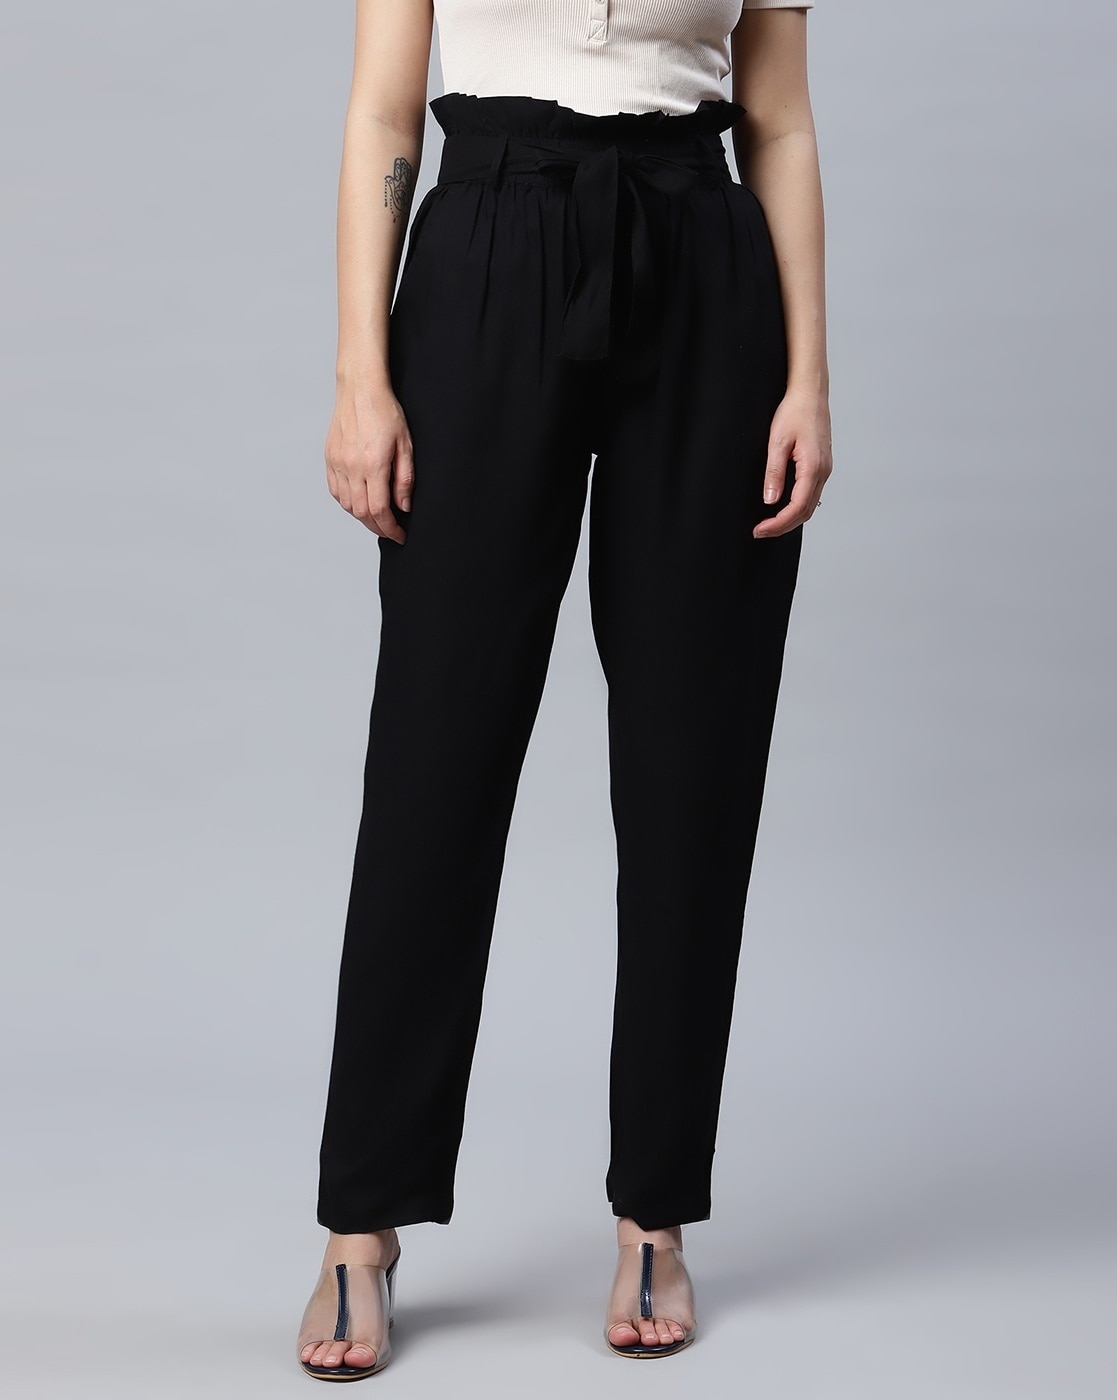 Black Paperbag Crepe Tie Waist Trousers  Trousers  Select UK